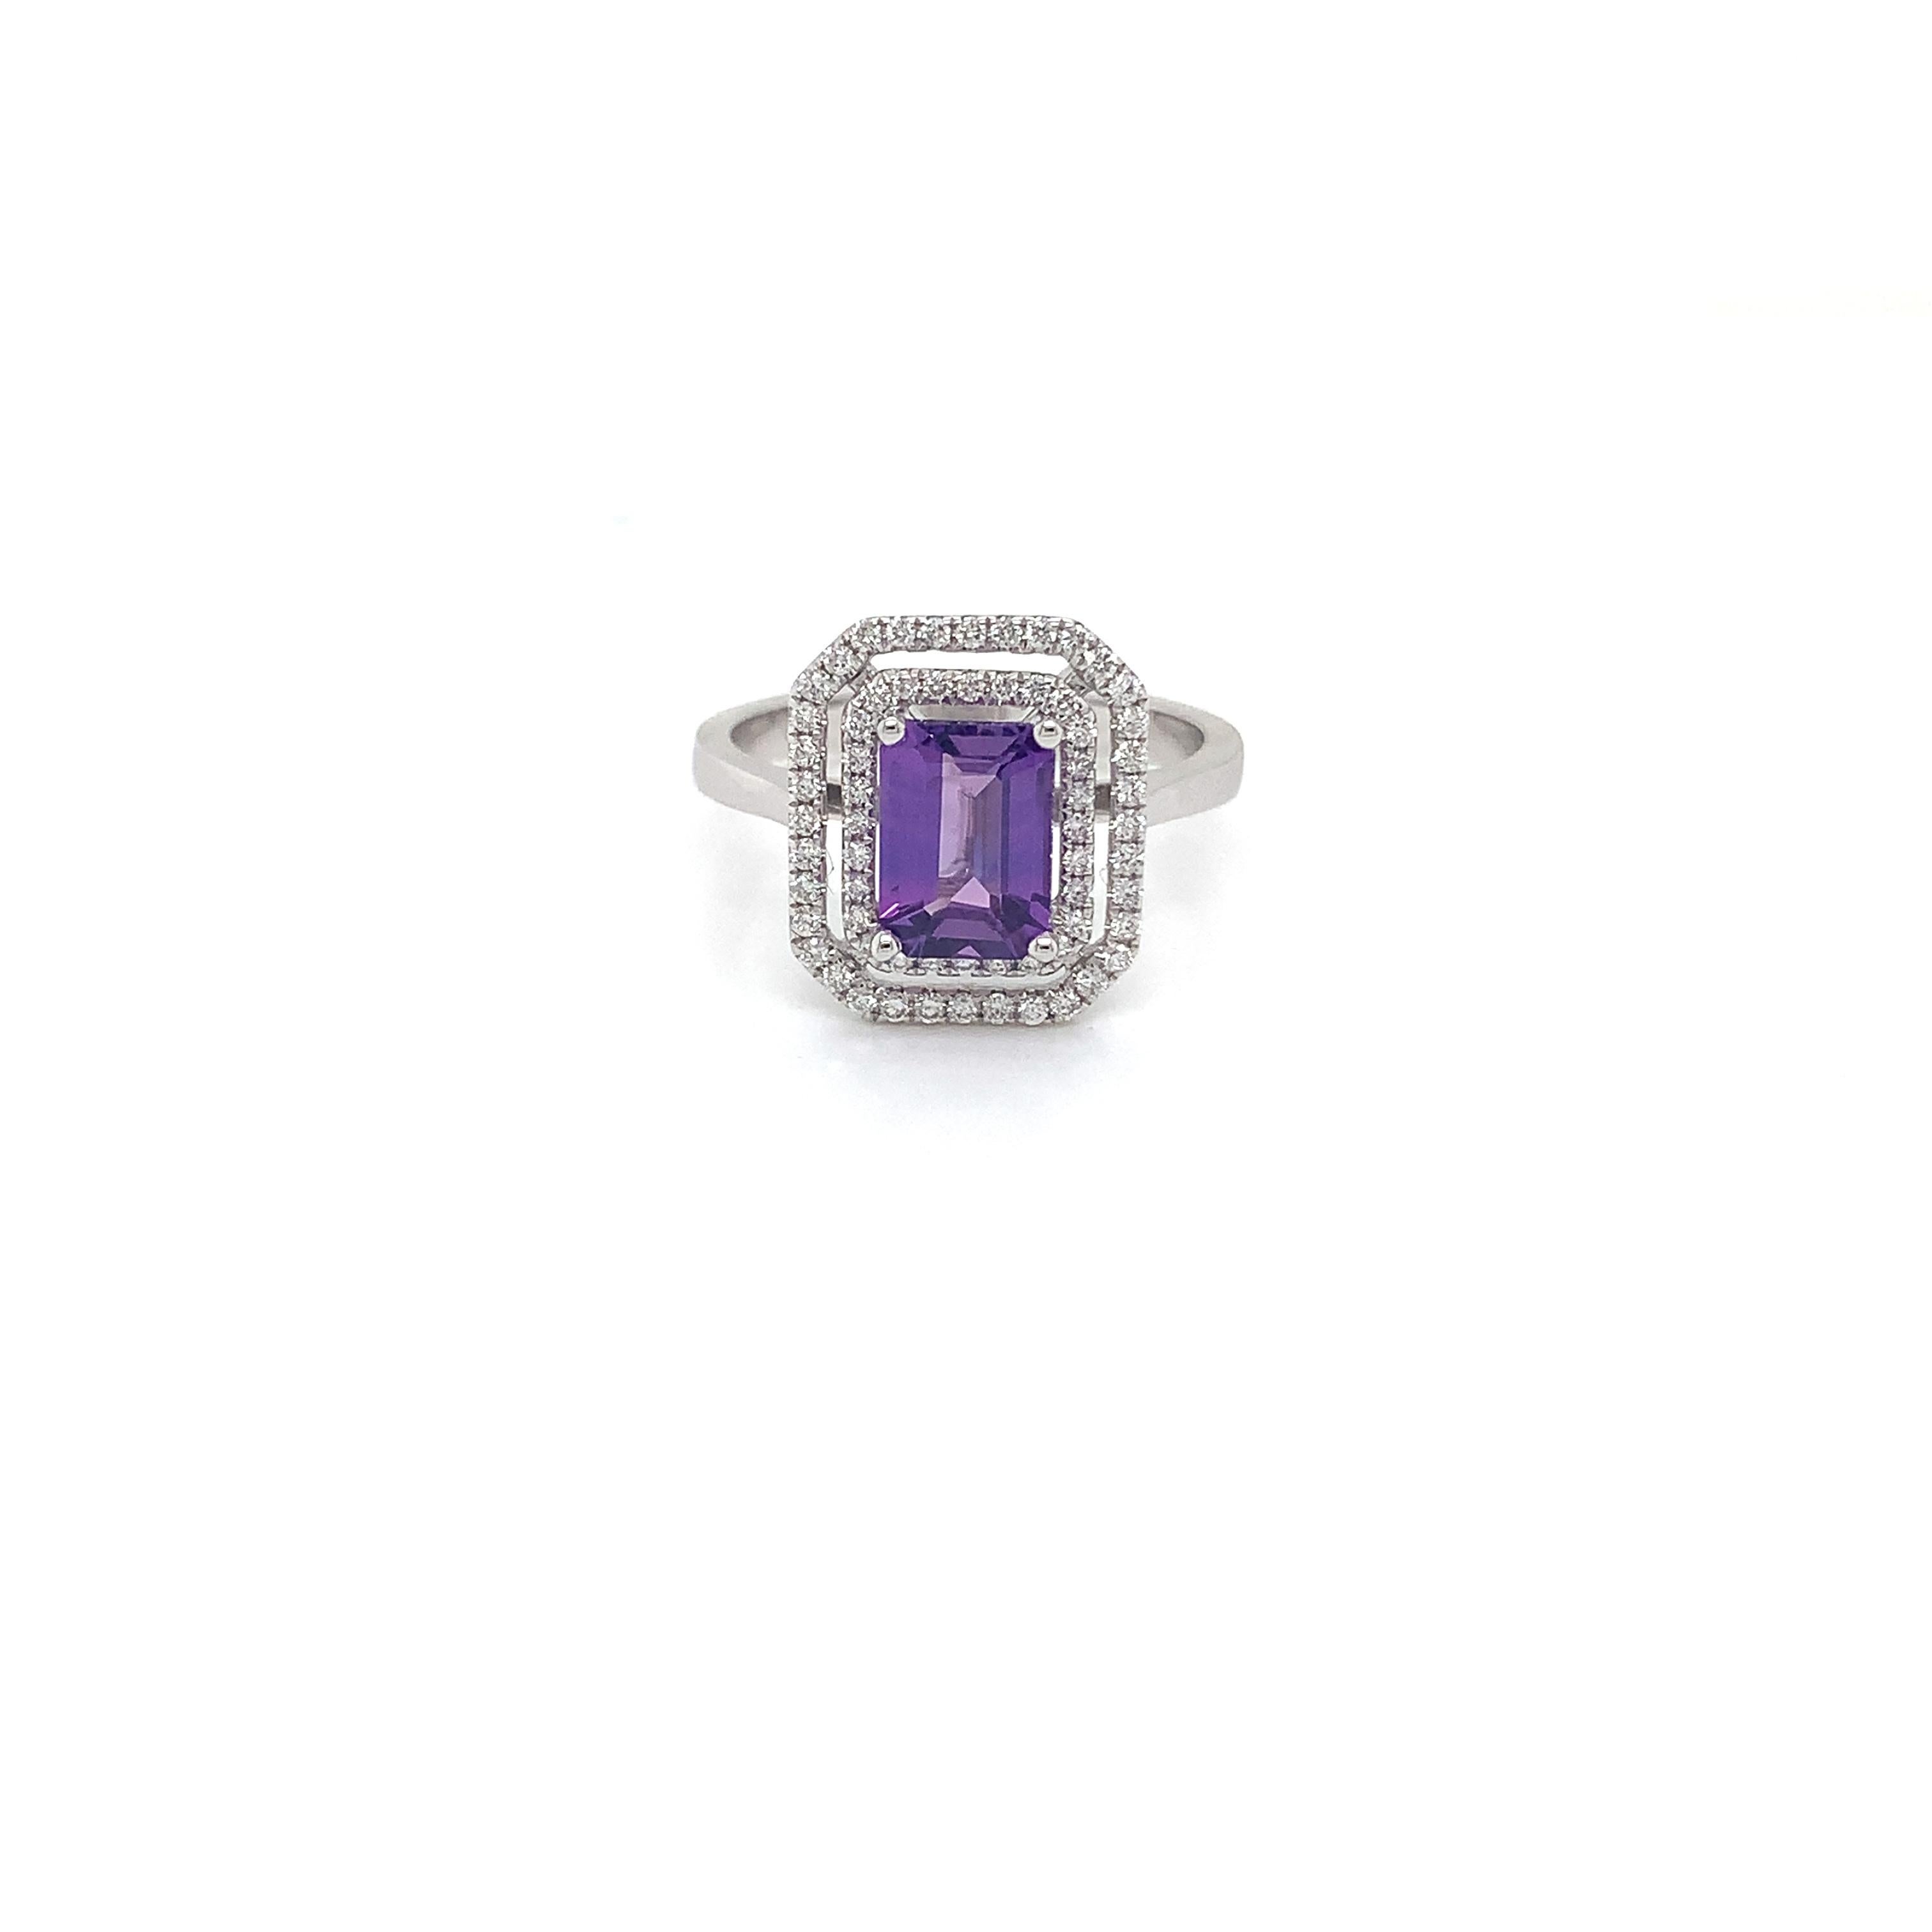 No Heat AGL Certified emerald cut puple sapphire weighing 1.61 cts.
Measuring (7.8x5.6) mm
6f pieces of diamonds weighing .29 cts
Set in 14k white gold ring